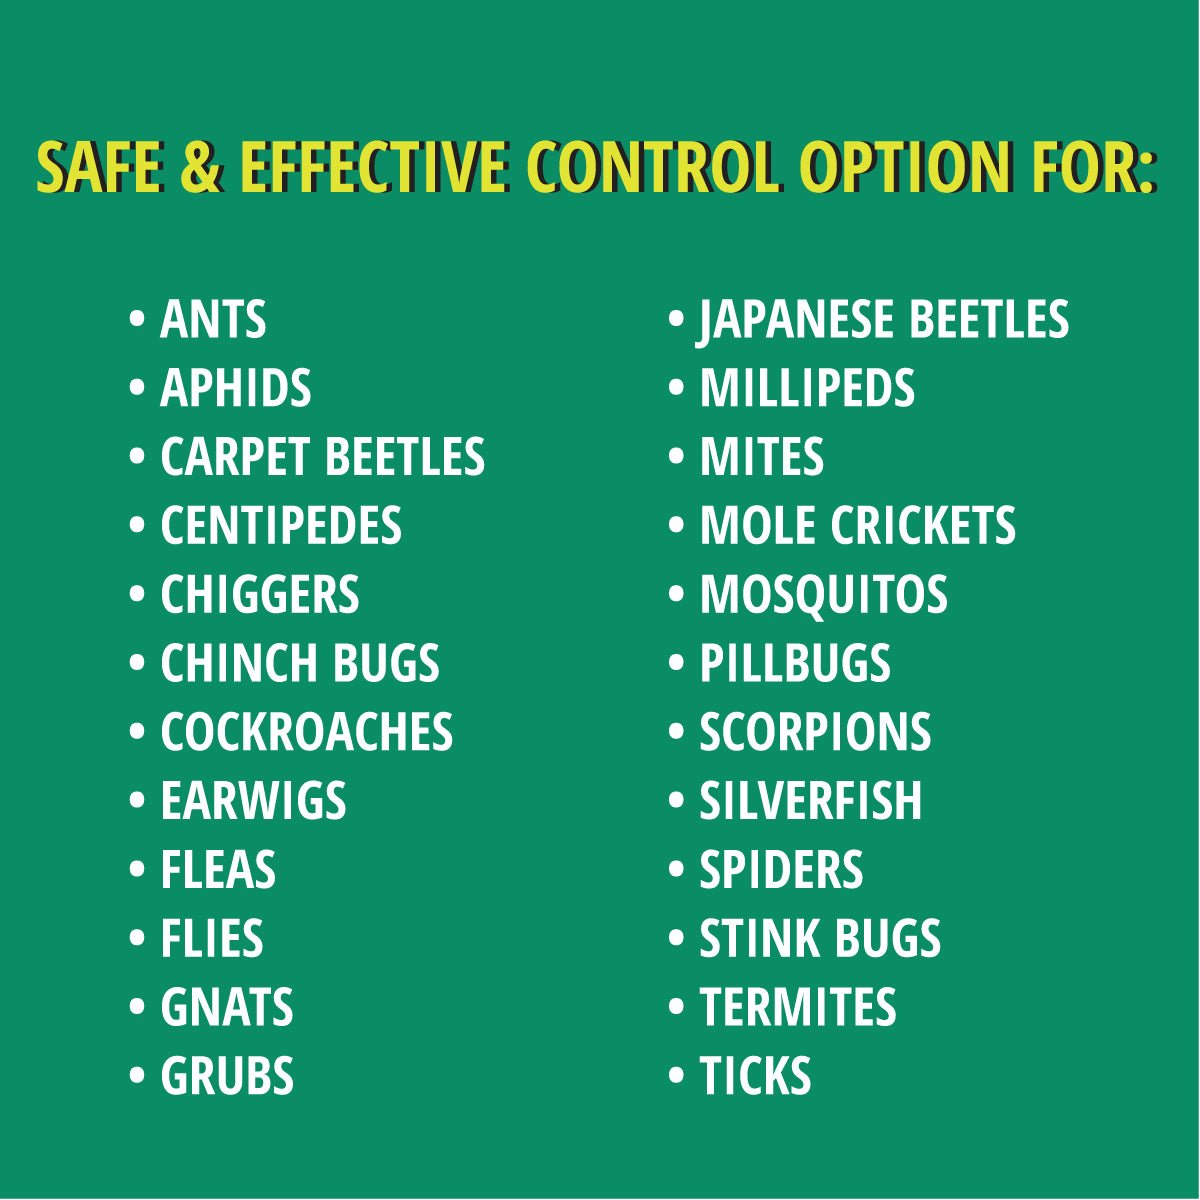 Stop Bugging Me!™ Lawn & Garden is a safe and effective control option against insects